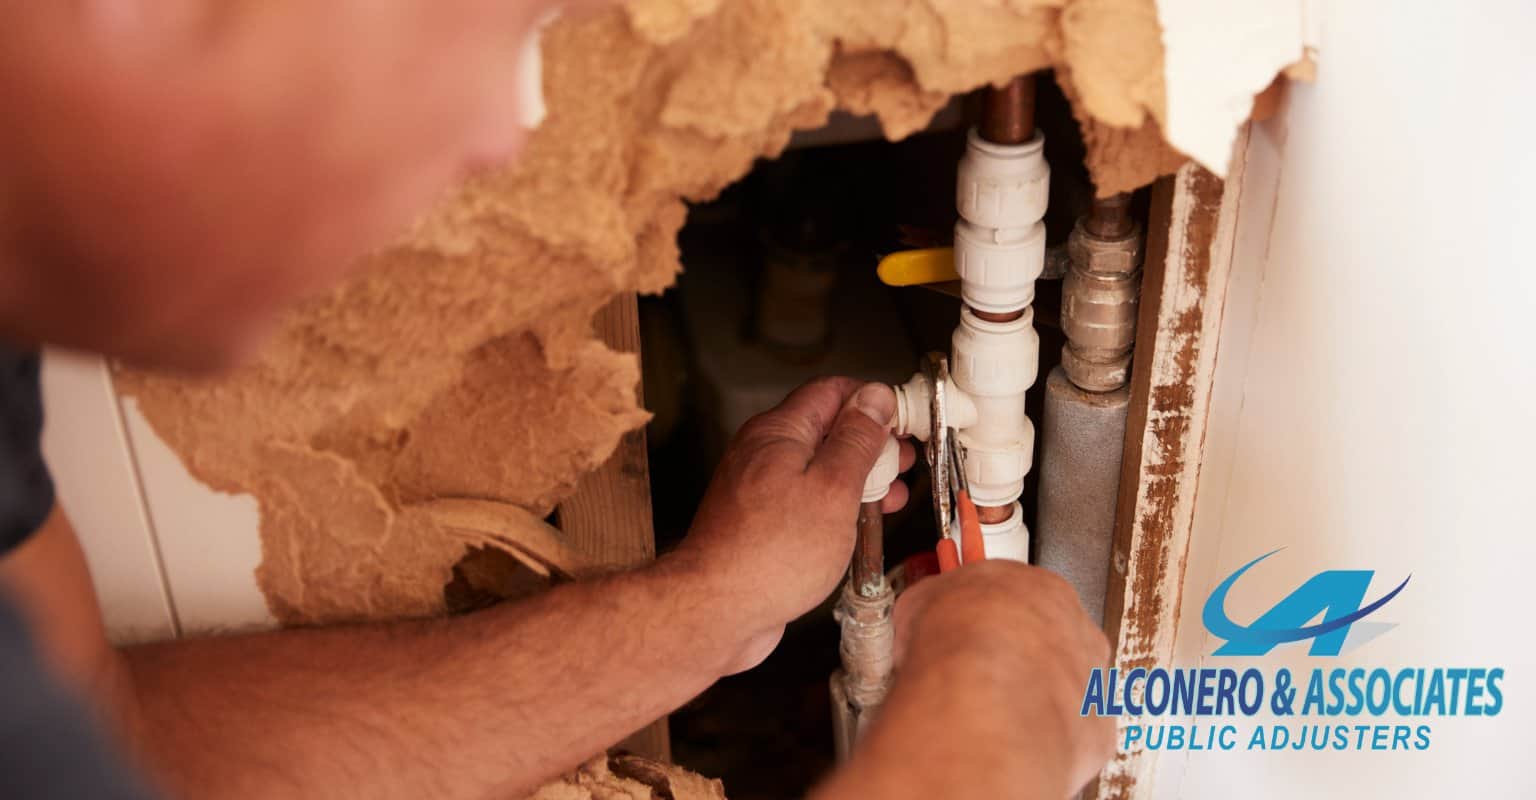 Public Adjuster assisting with Pipe Burst Insurance Claim in Tampa